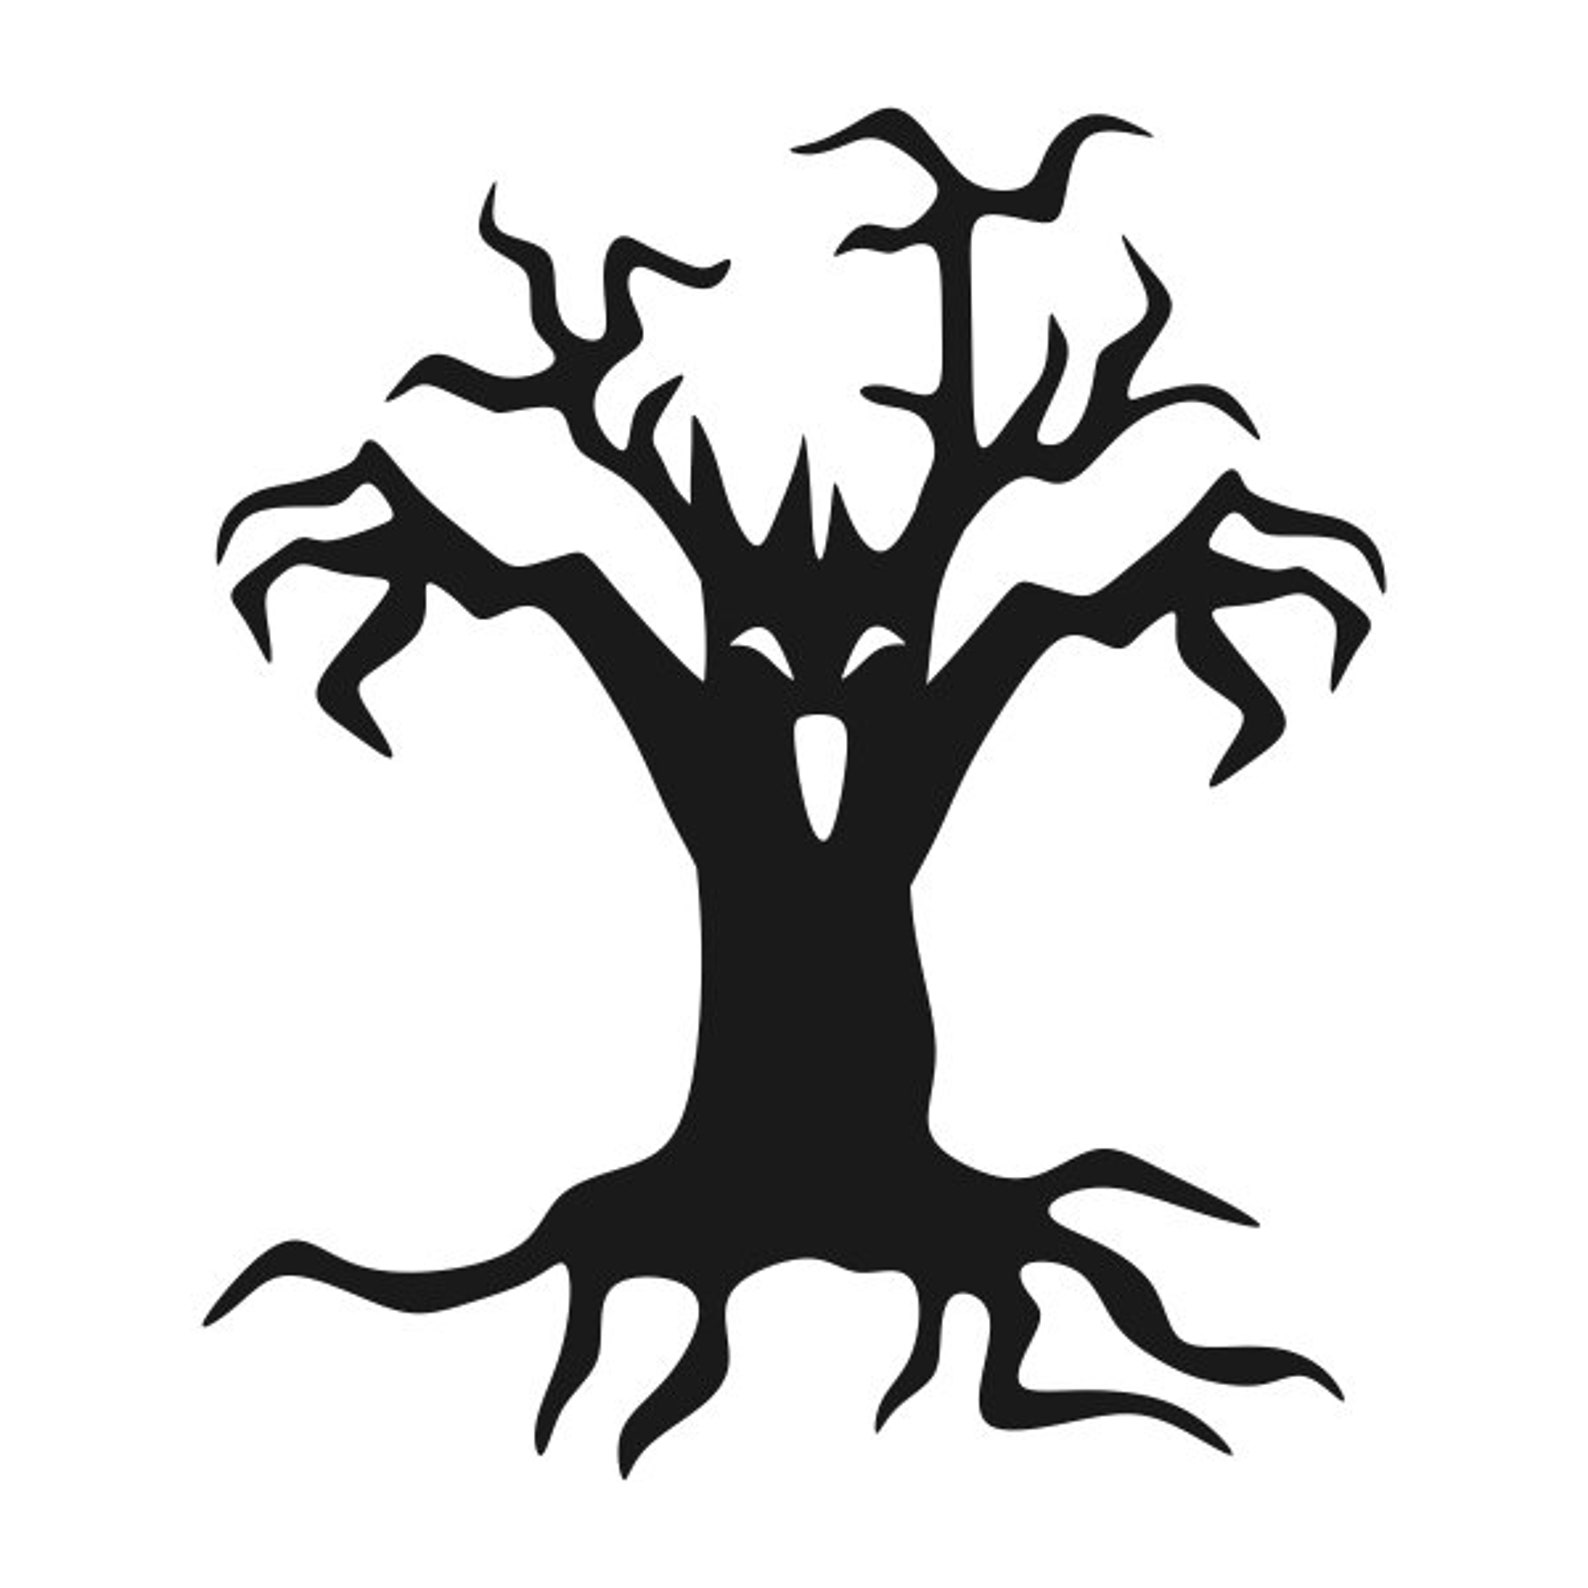 Scary Trees Cuttable Design PNG DXF SVG & Eps File Silhouette - Etsy